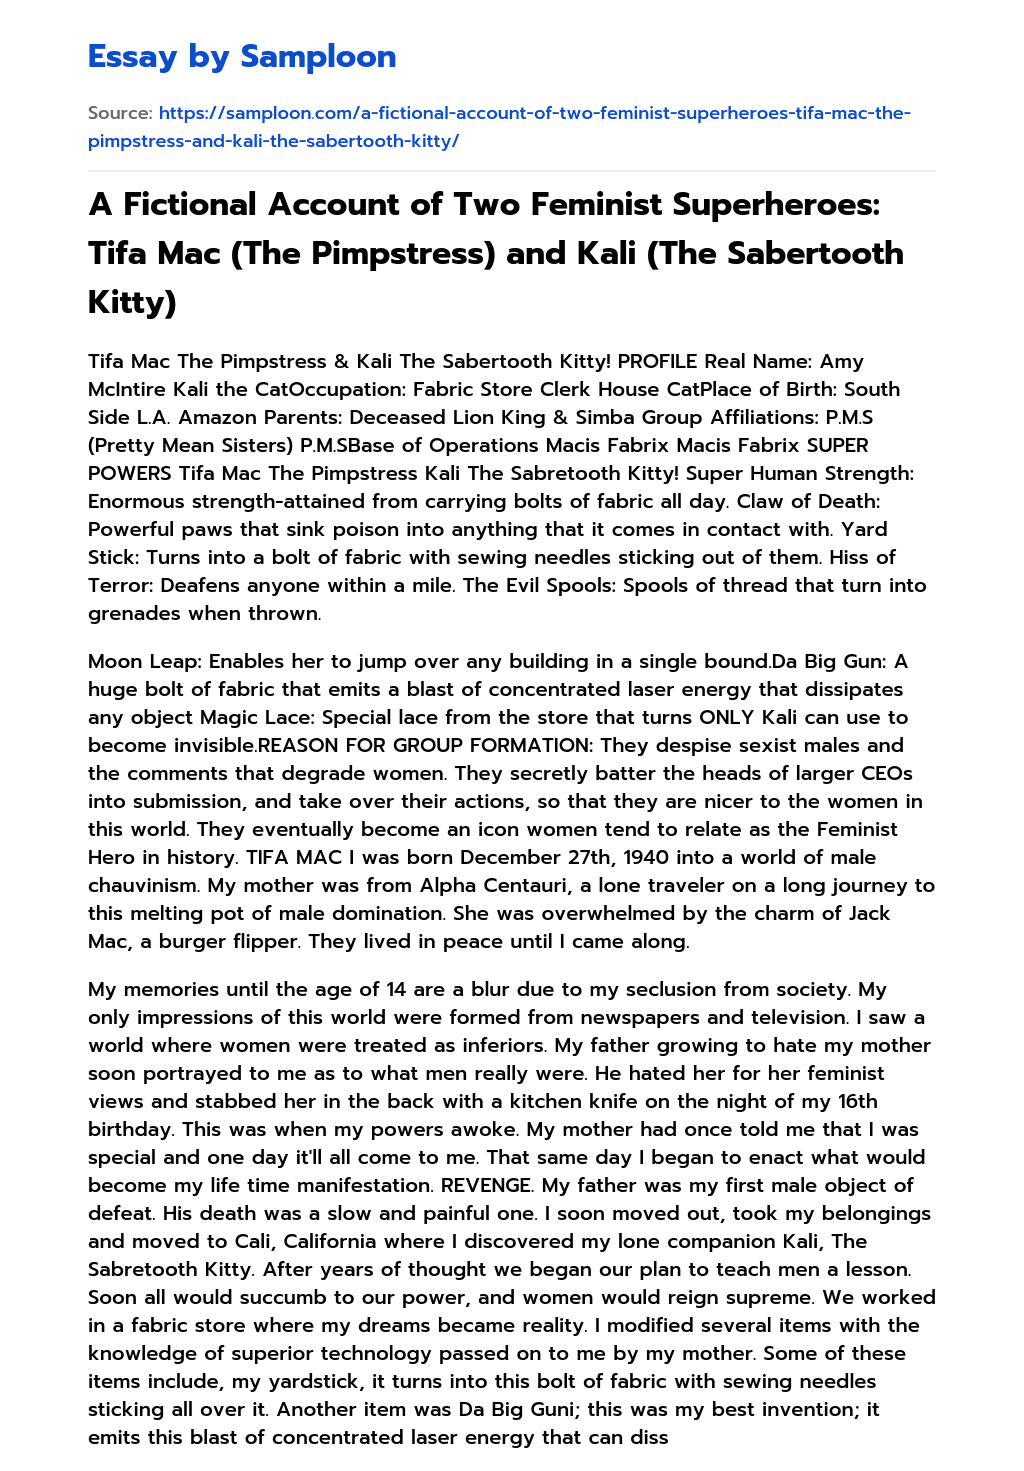 A Fictional Account of Two Feminist Superheroes: Tifa Mac (The Pimpstress) and Kali (The Sabertooth Kitty) essay